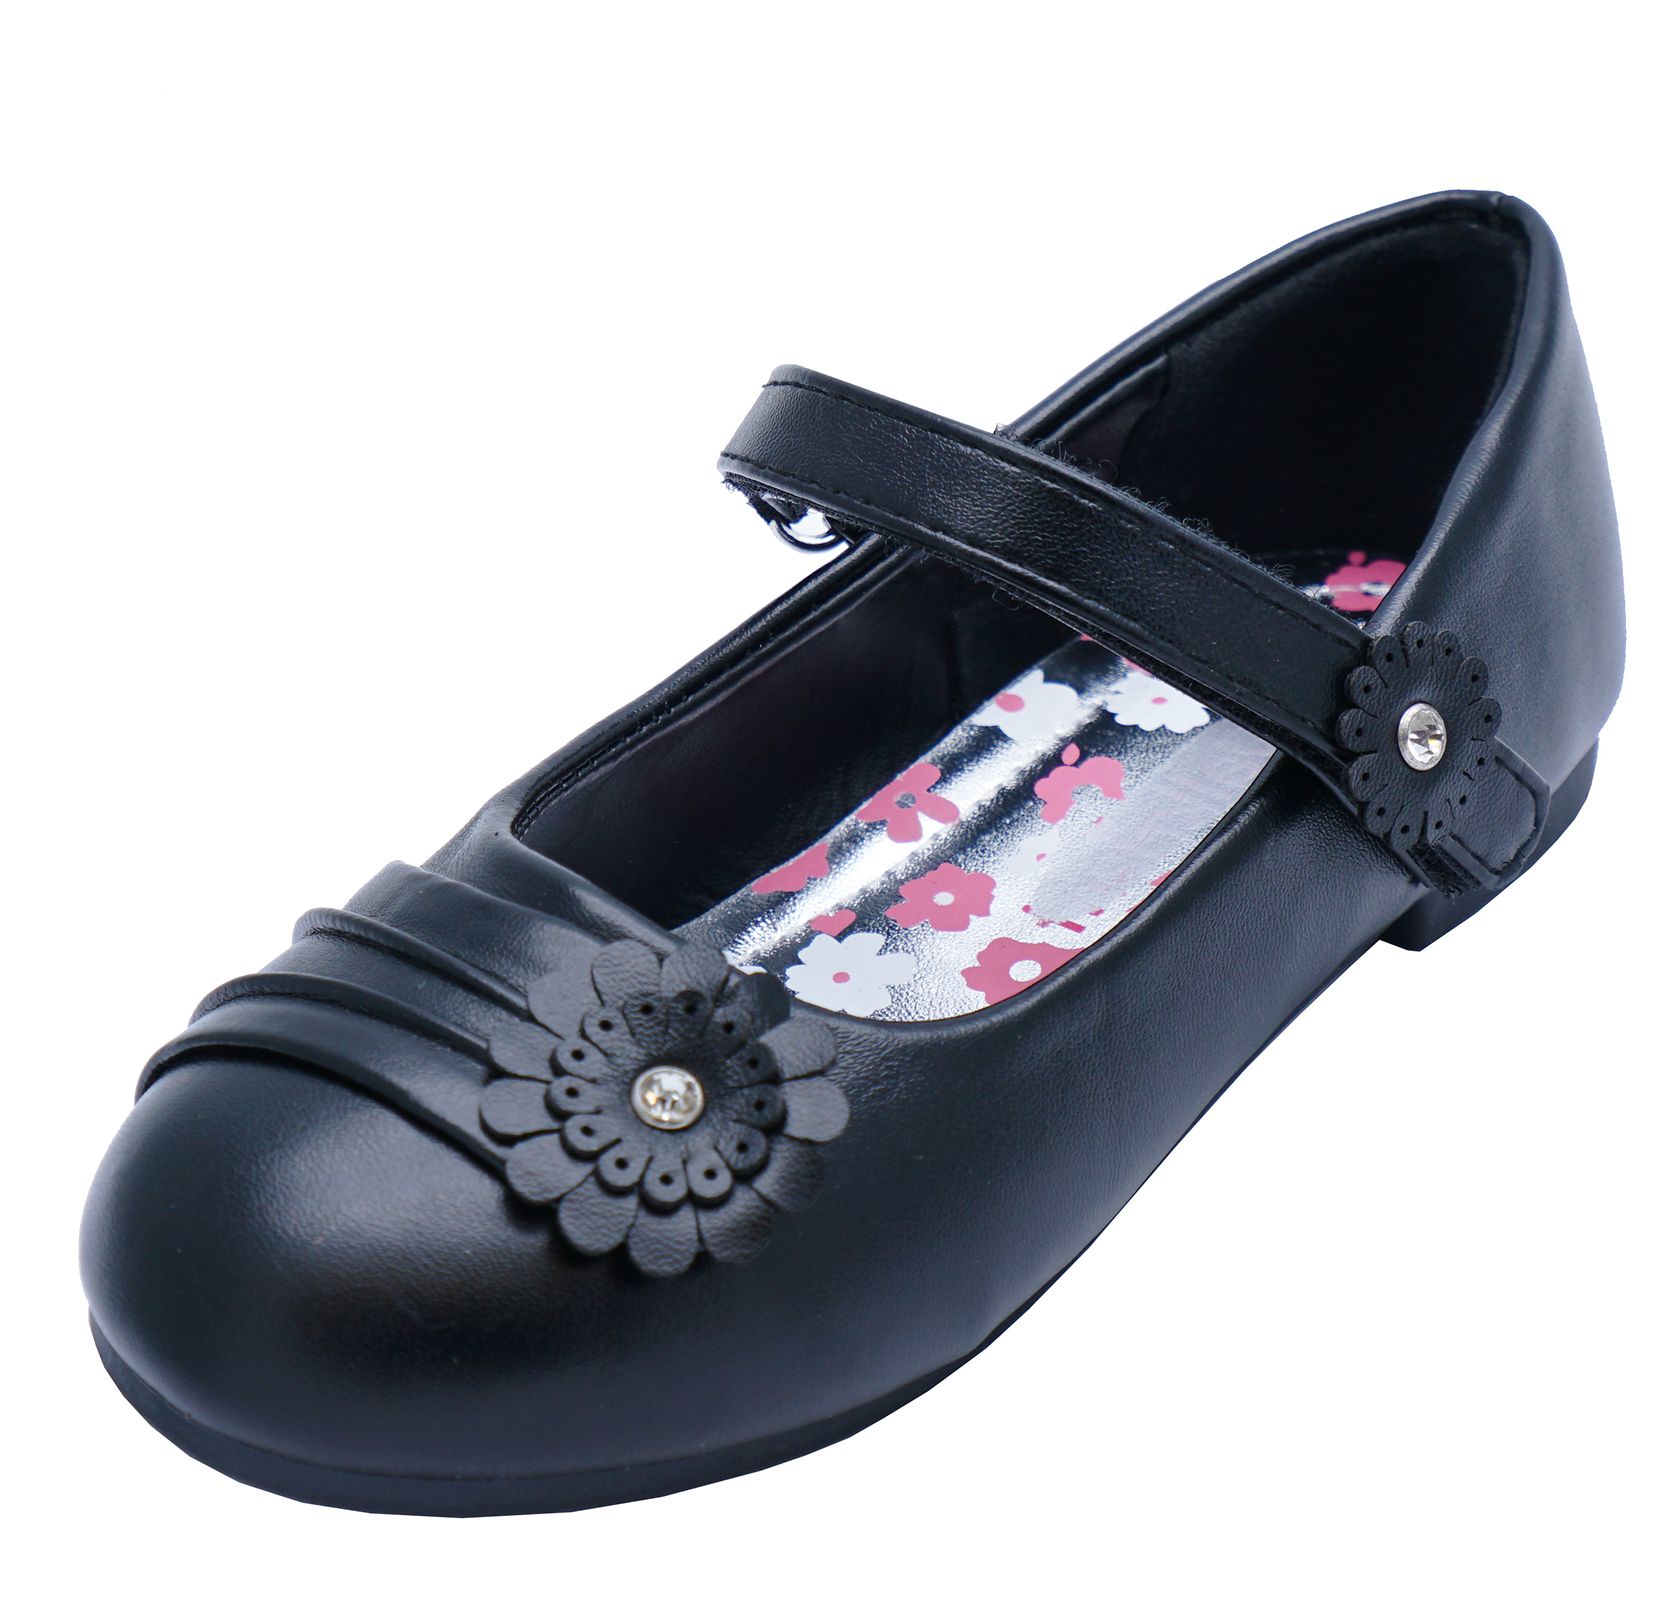 GIRLS KIDS CHILDRENS FLAT MARY JANE TOUCH STRAP FLOWER DRESS SCHOOL SHOES SIZE